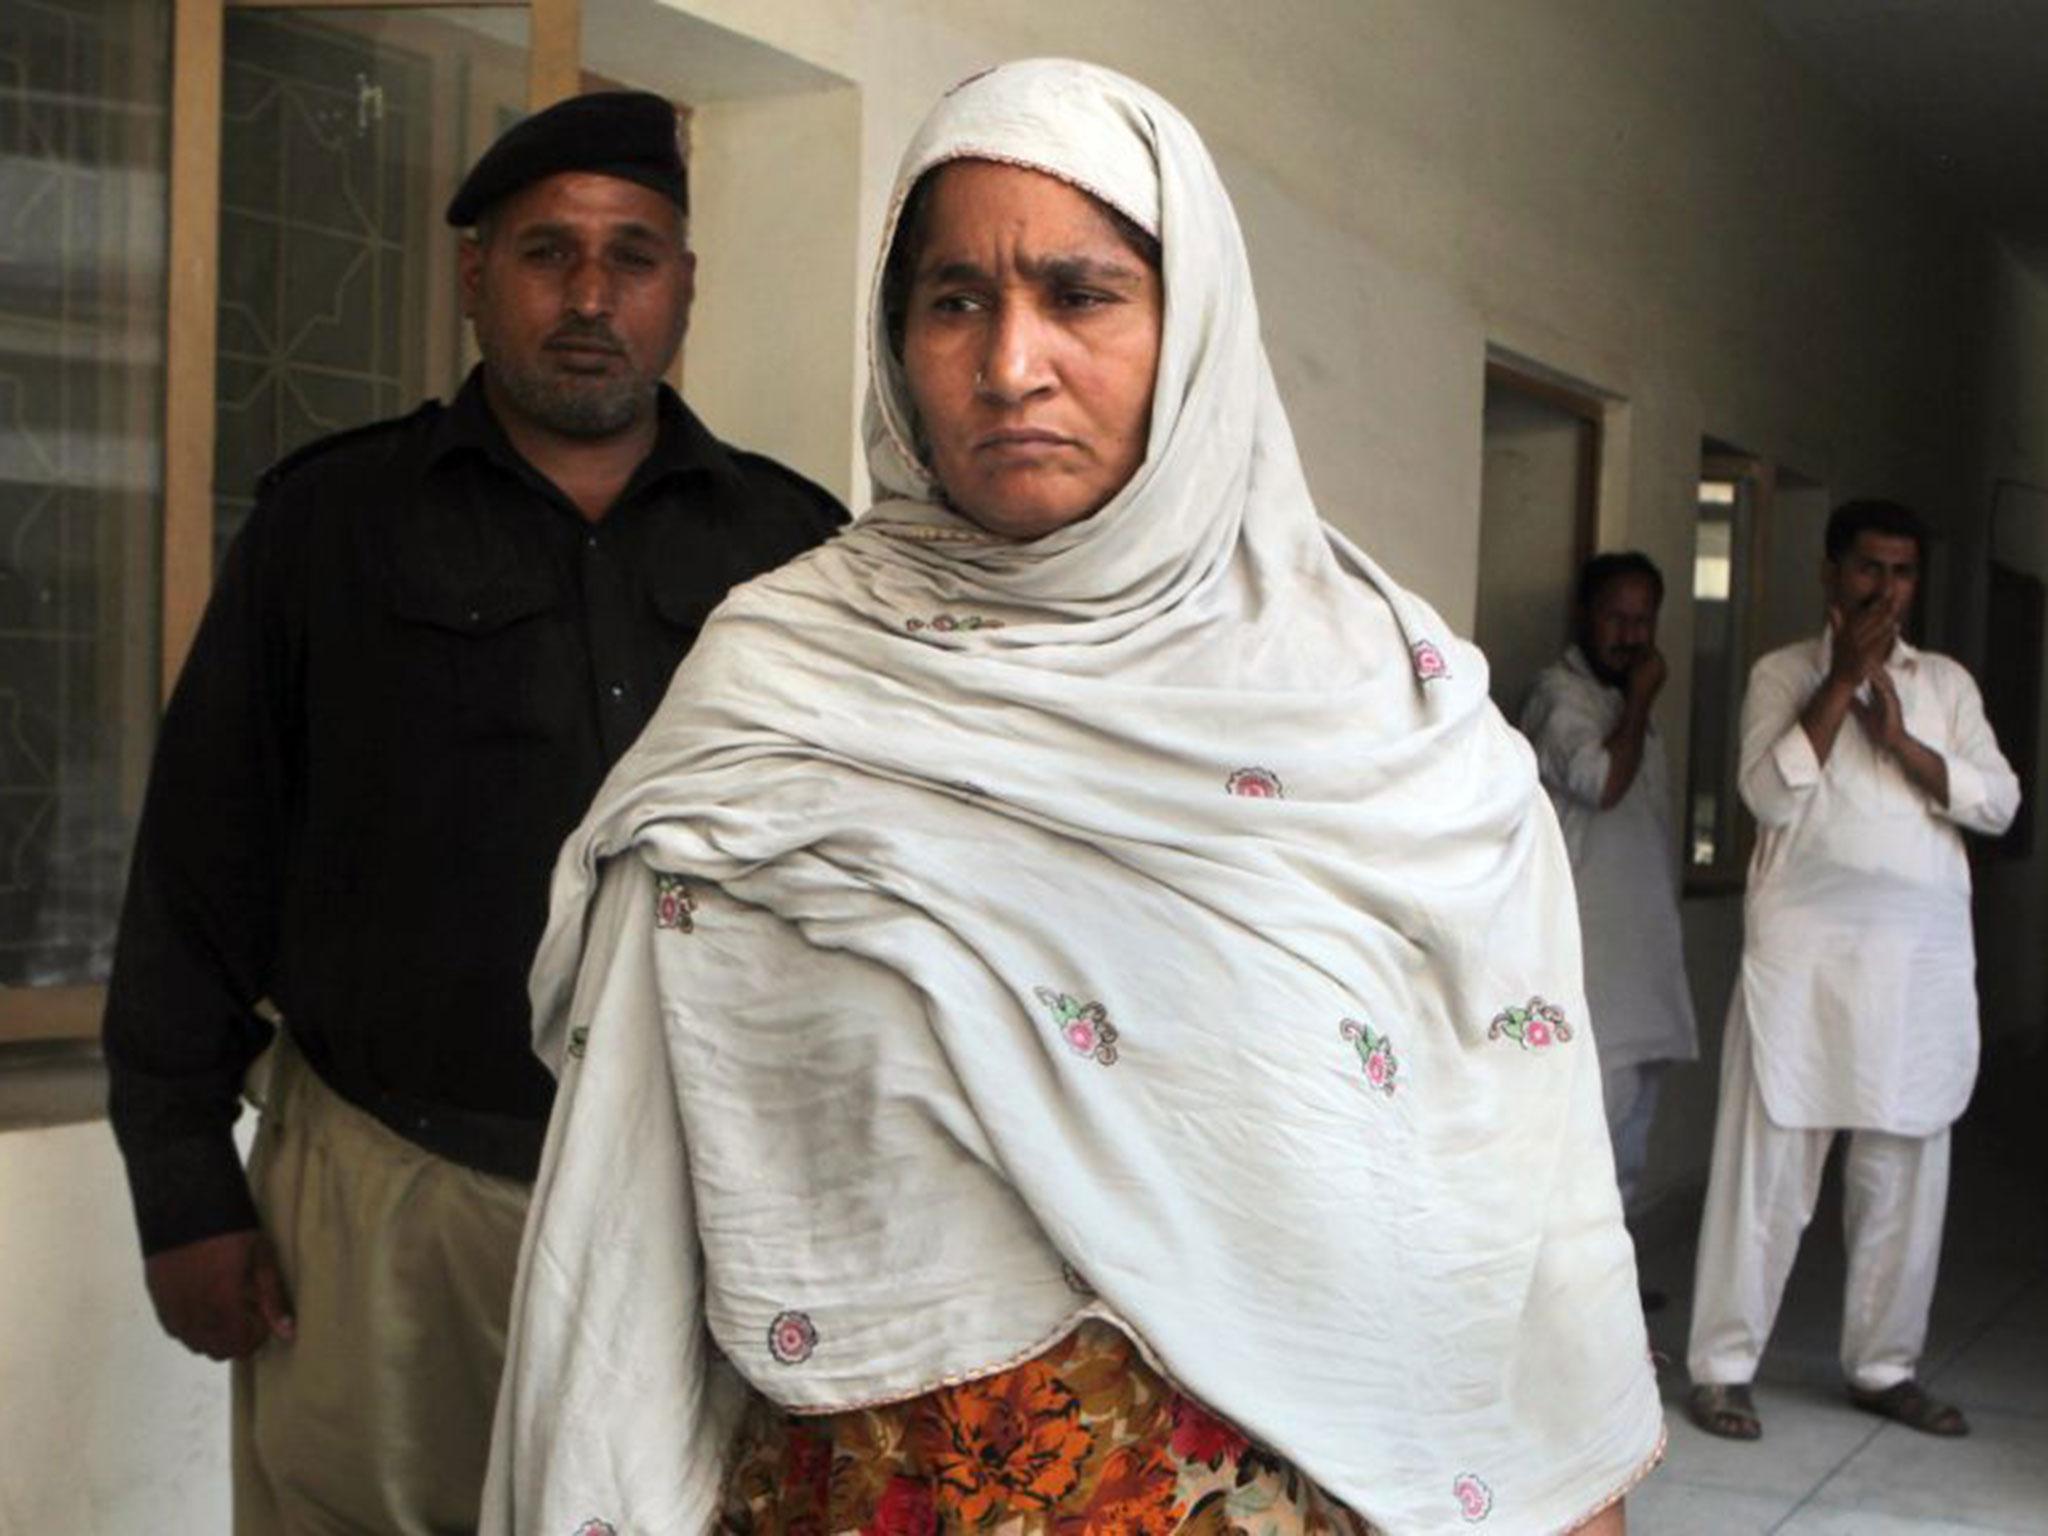 Amina Bibi, center, who who local police say killed her pregnant daughter, 22-year-old Muqadas Tofeeq, is detained at a police station in Gujranwala, Pakistan